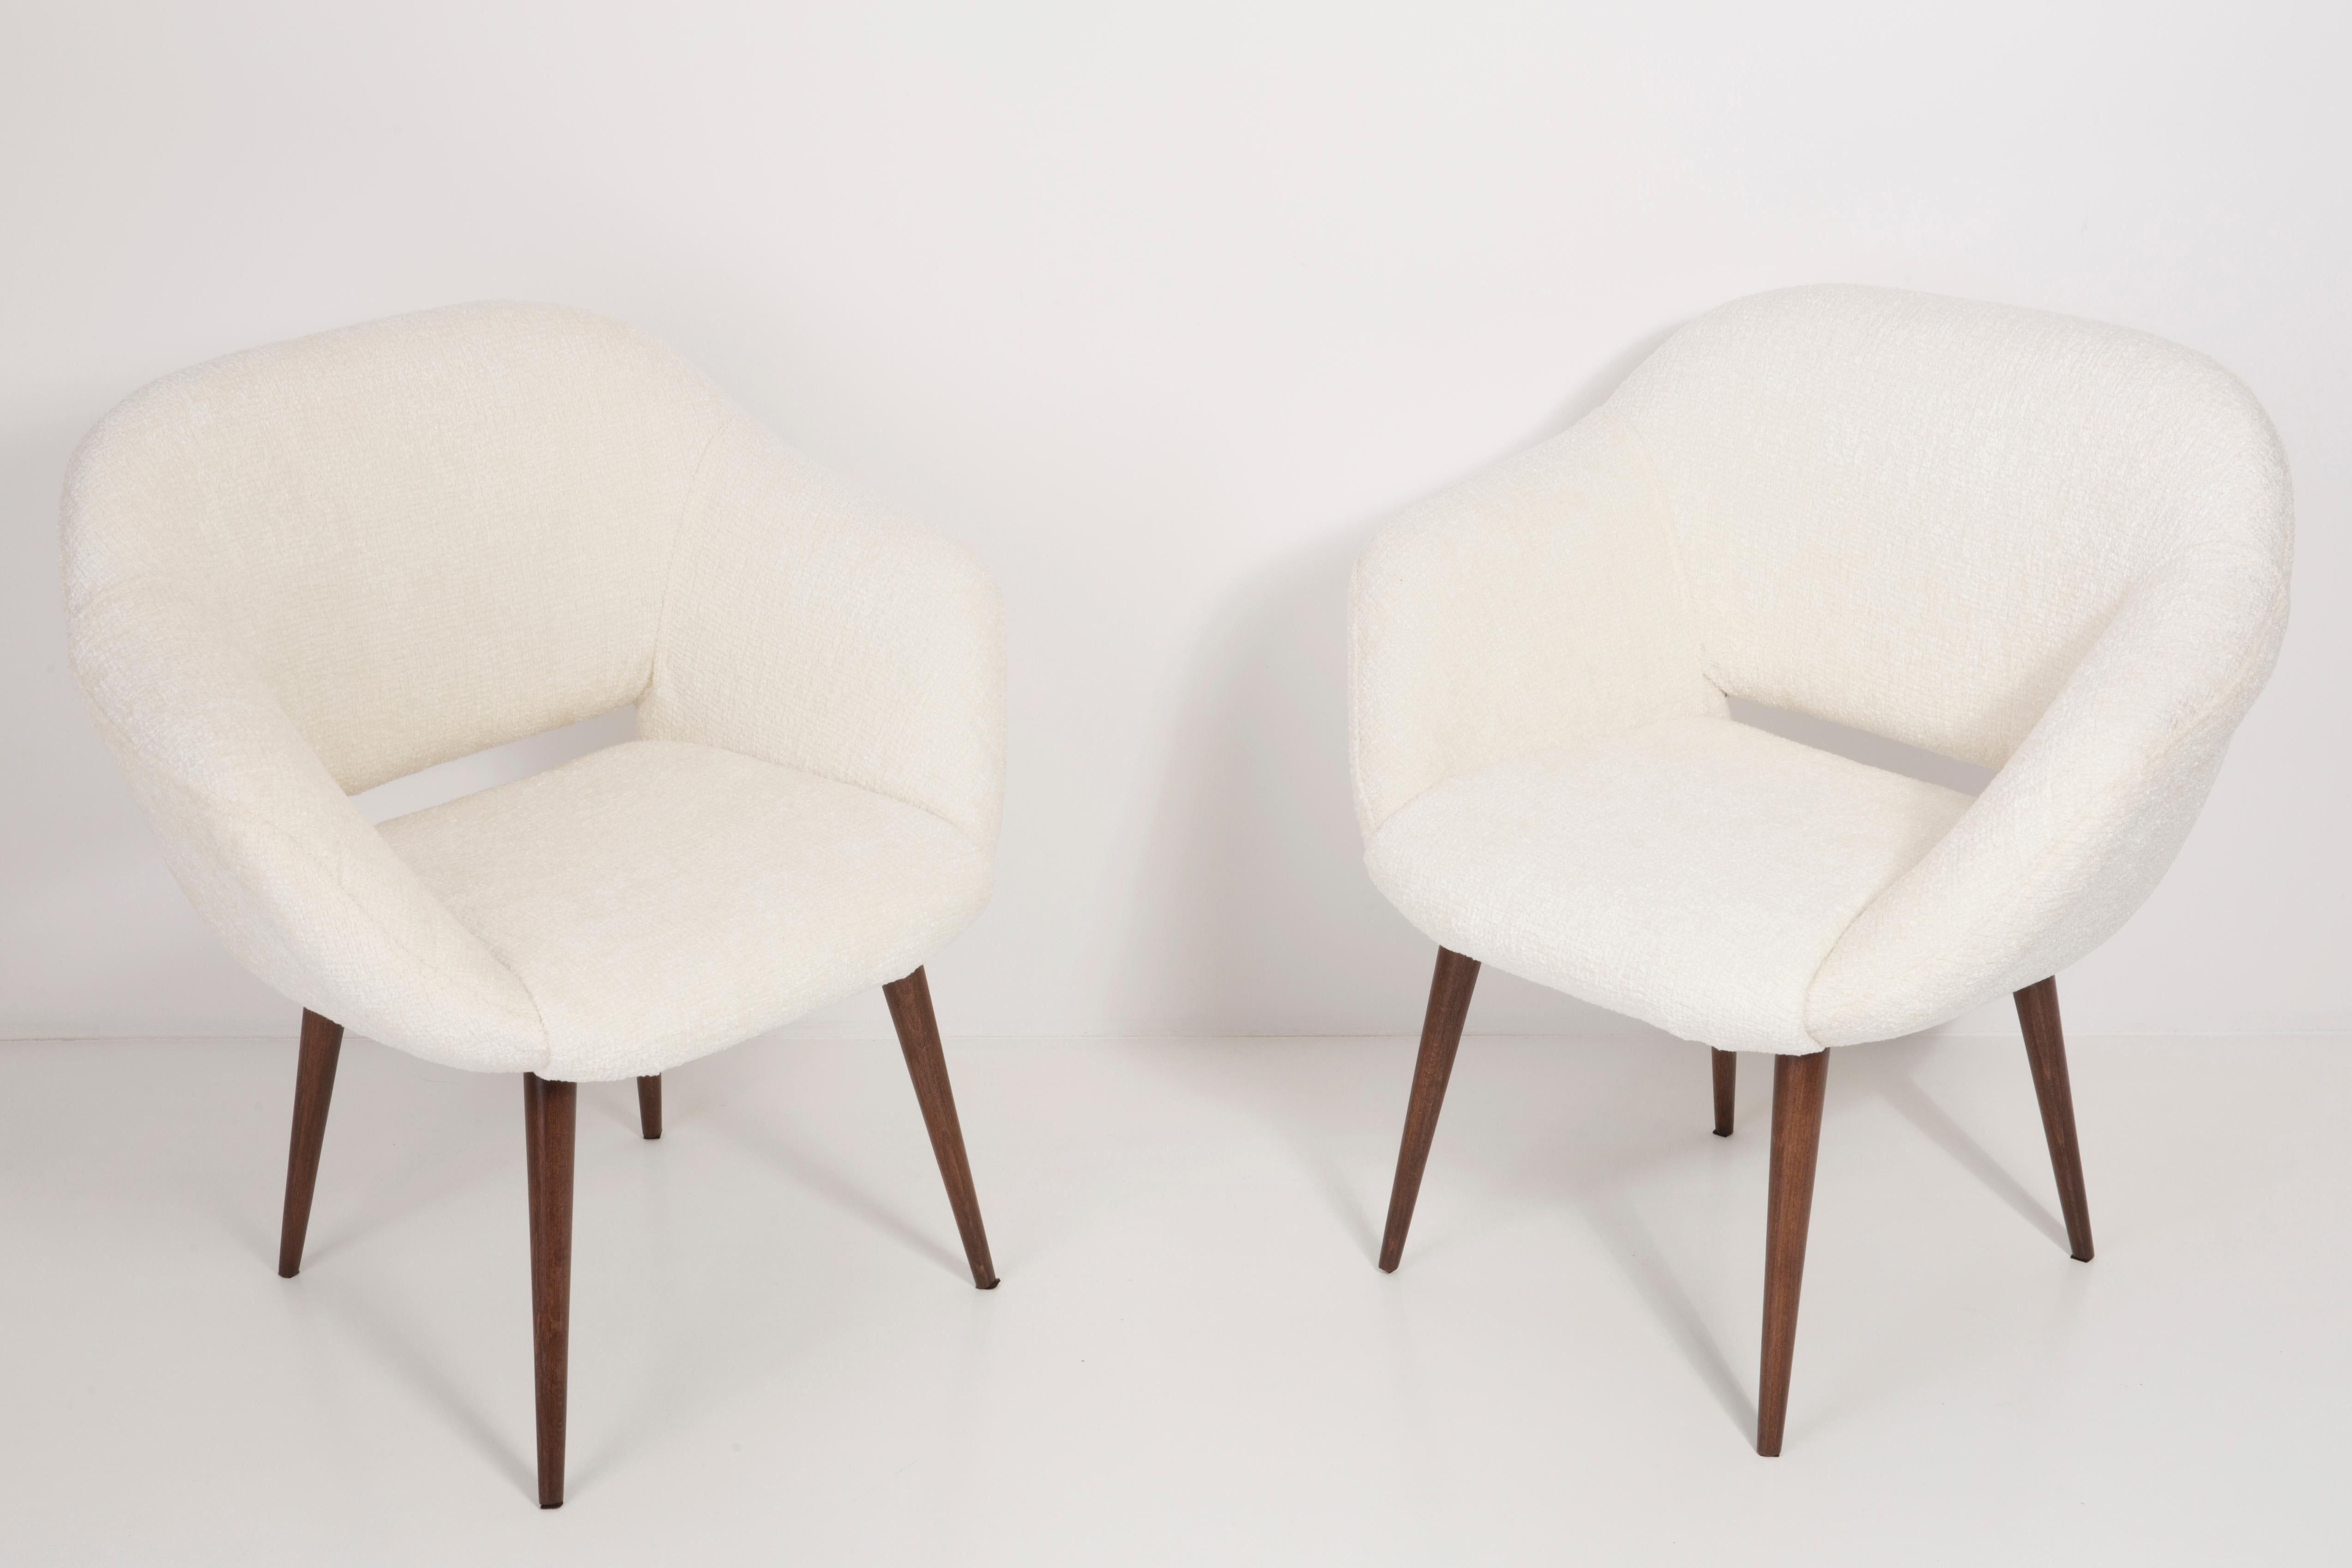 German armchairs produced in the 1960s in Berlin. The armchairs are after a thorough renovation of upholstery and carpentry. The wooden frame is thoroughly cleaned and covered with a semi-matte varnish in the color of a nut. The upholstery is made